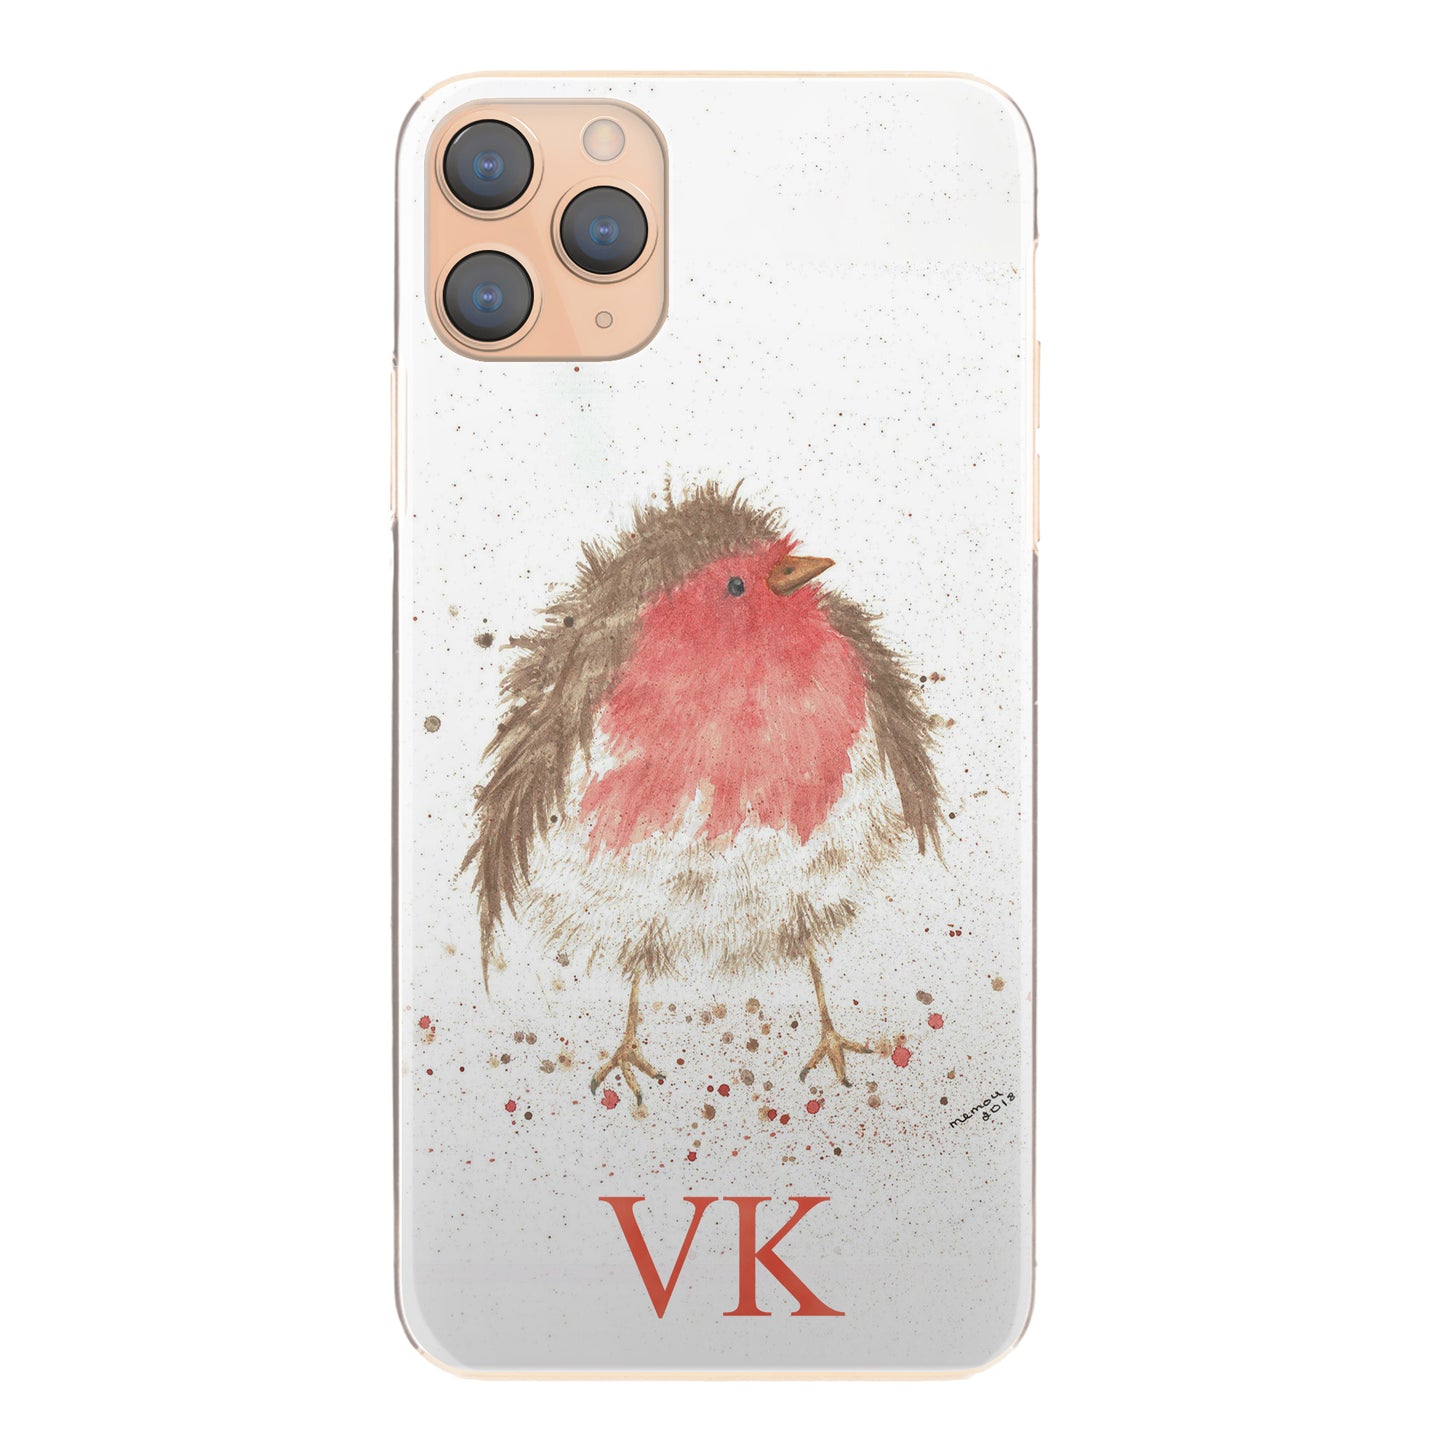 Personalised Huawei Phone Hard Case with Speckled Robin and Red Initials